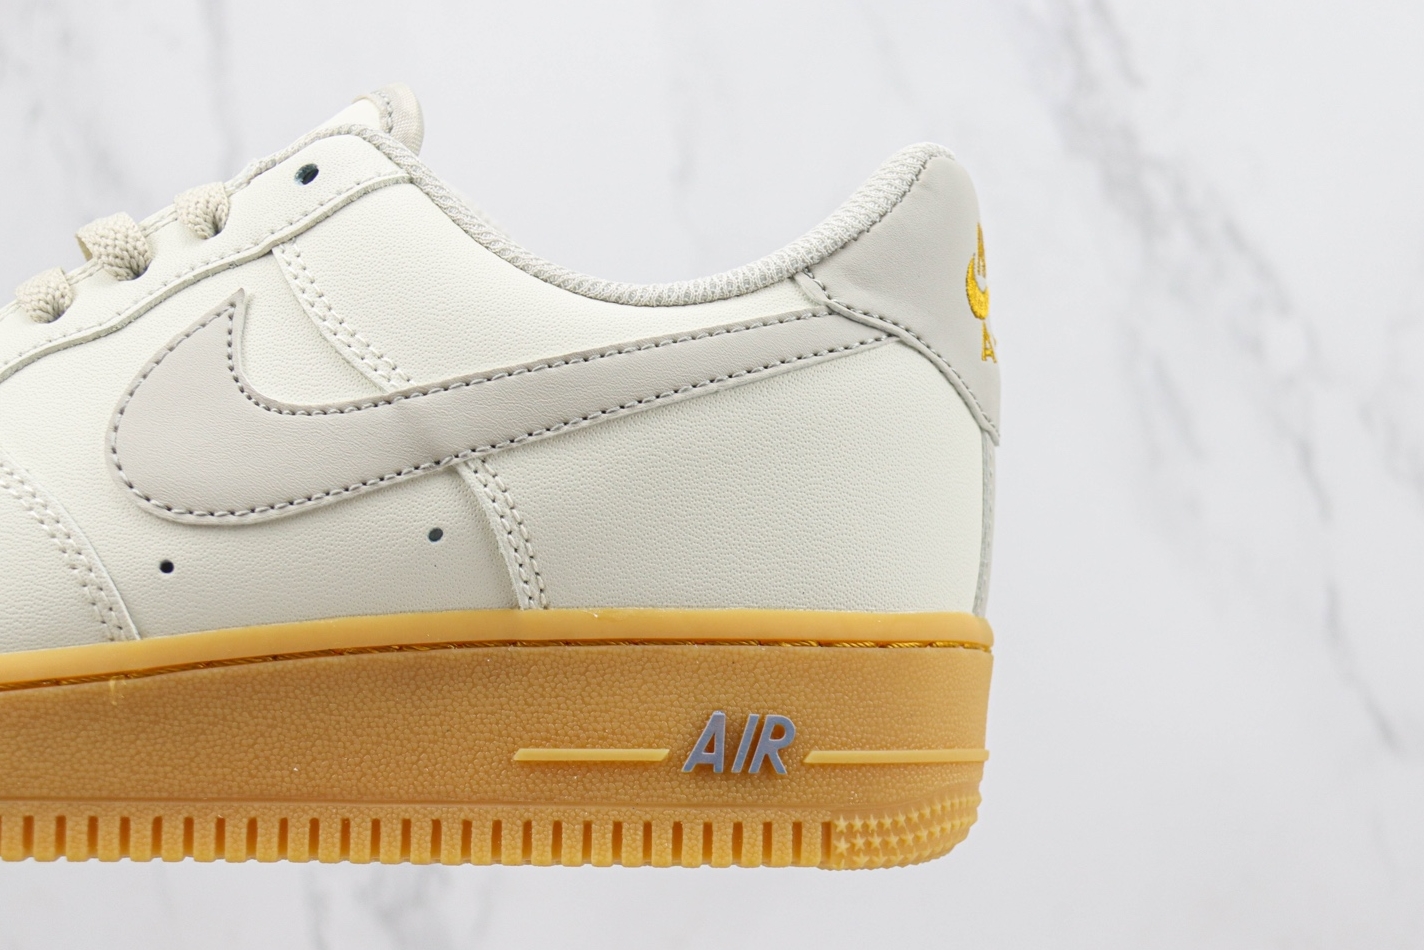 Nike Air Force 1 07 Low Light Grey Gum Gold XC2351-066 - Stylish and Durable Footwear for Men and Women